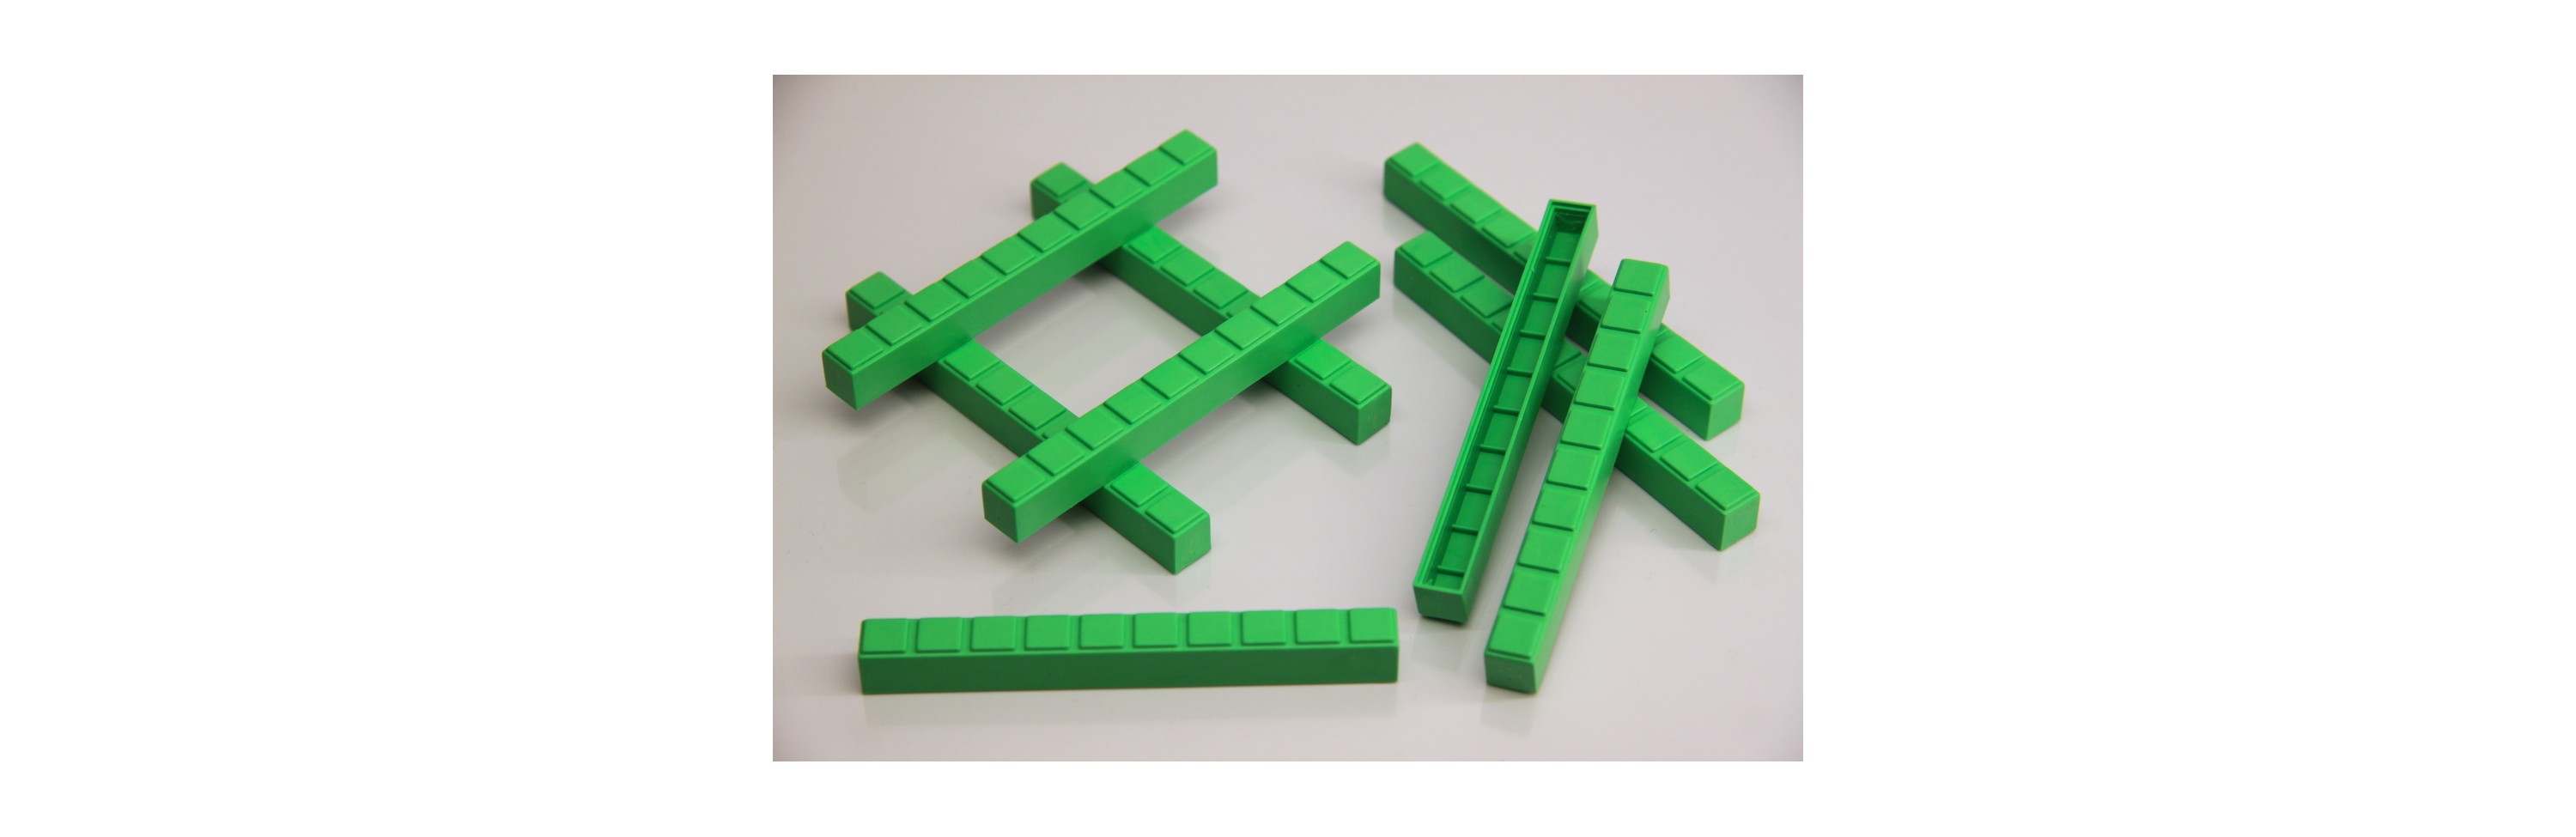 Wissner® active learning - Rods of Ten 50 pcs (green) RE-Plastic®